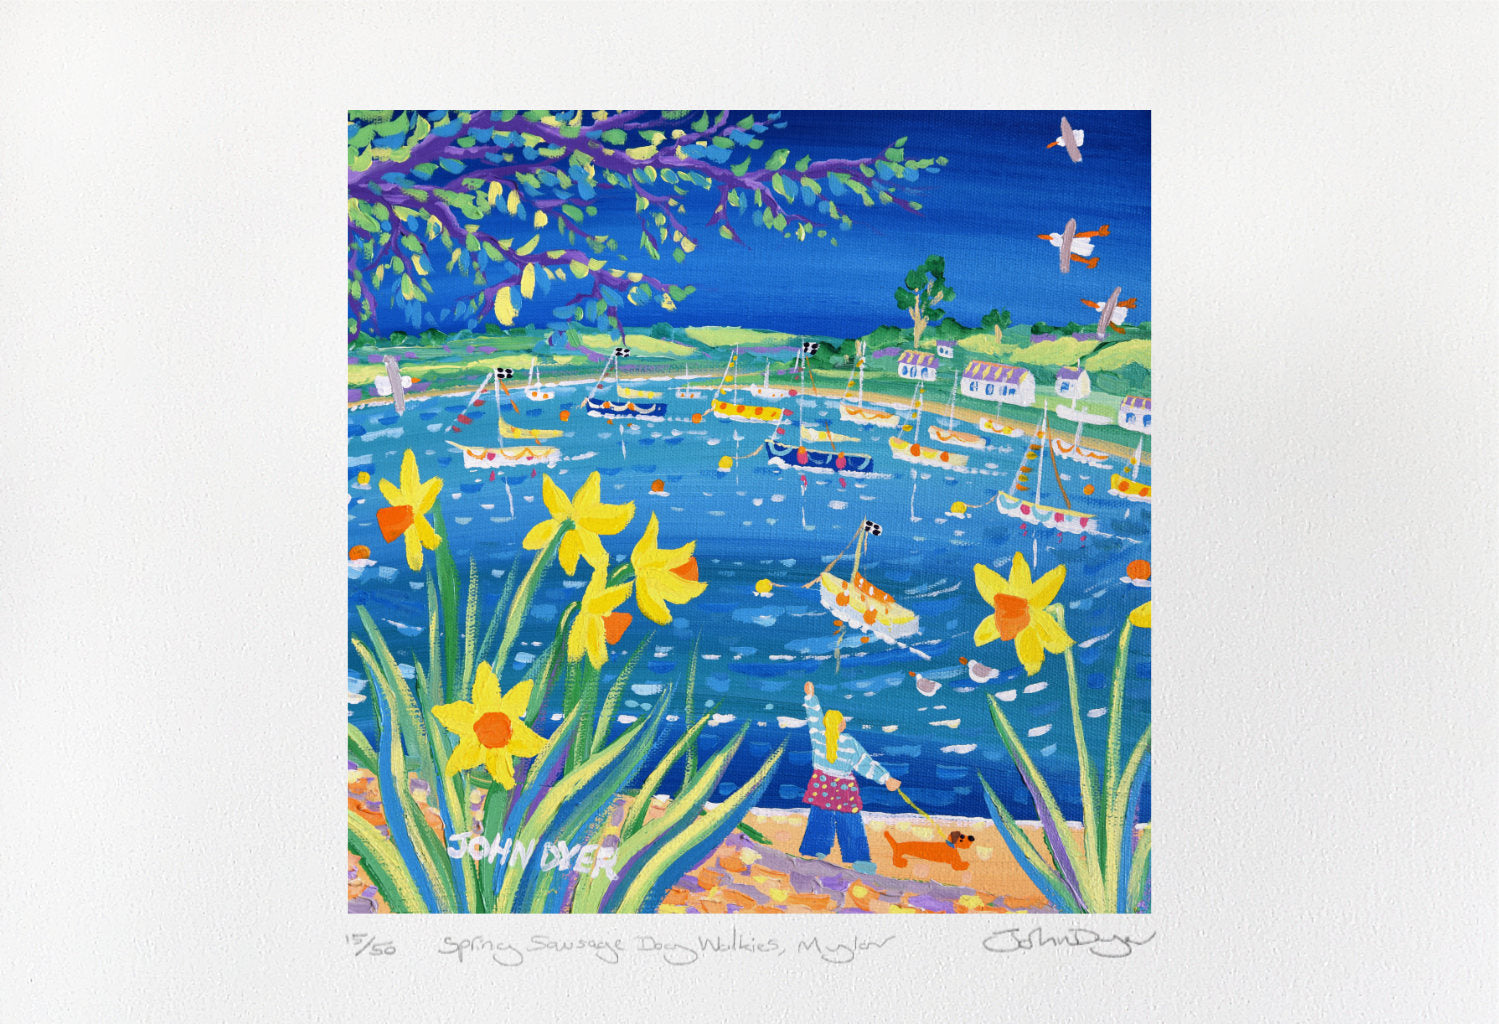 Signed Limited Edition Print by Cornish Artist John Dyer. 'Spring Sausage Dog Walkies, Mylor'. Cornwall Art Gallery Print